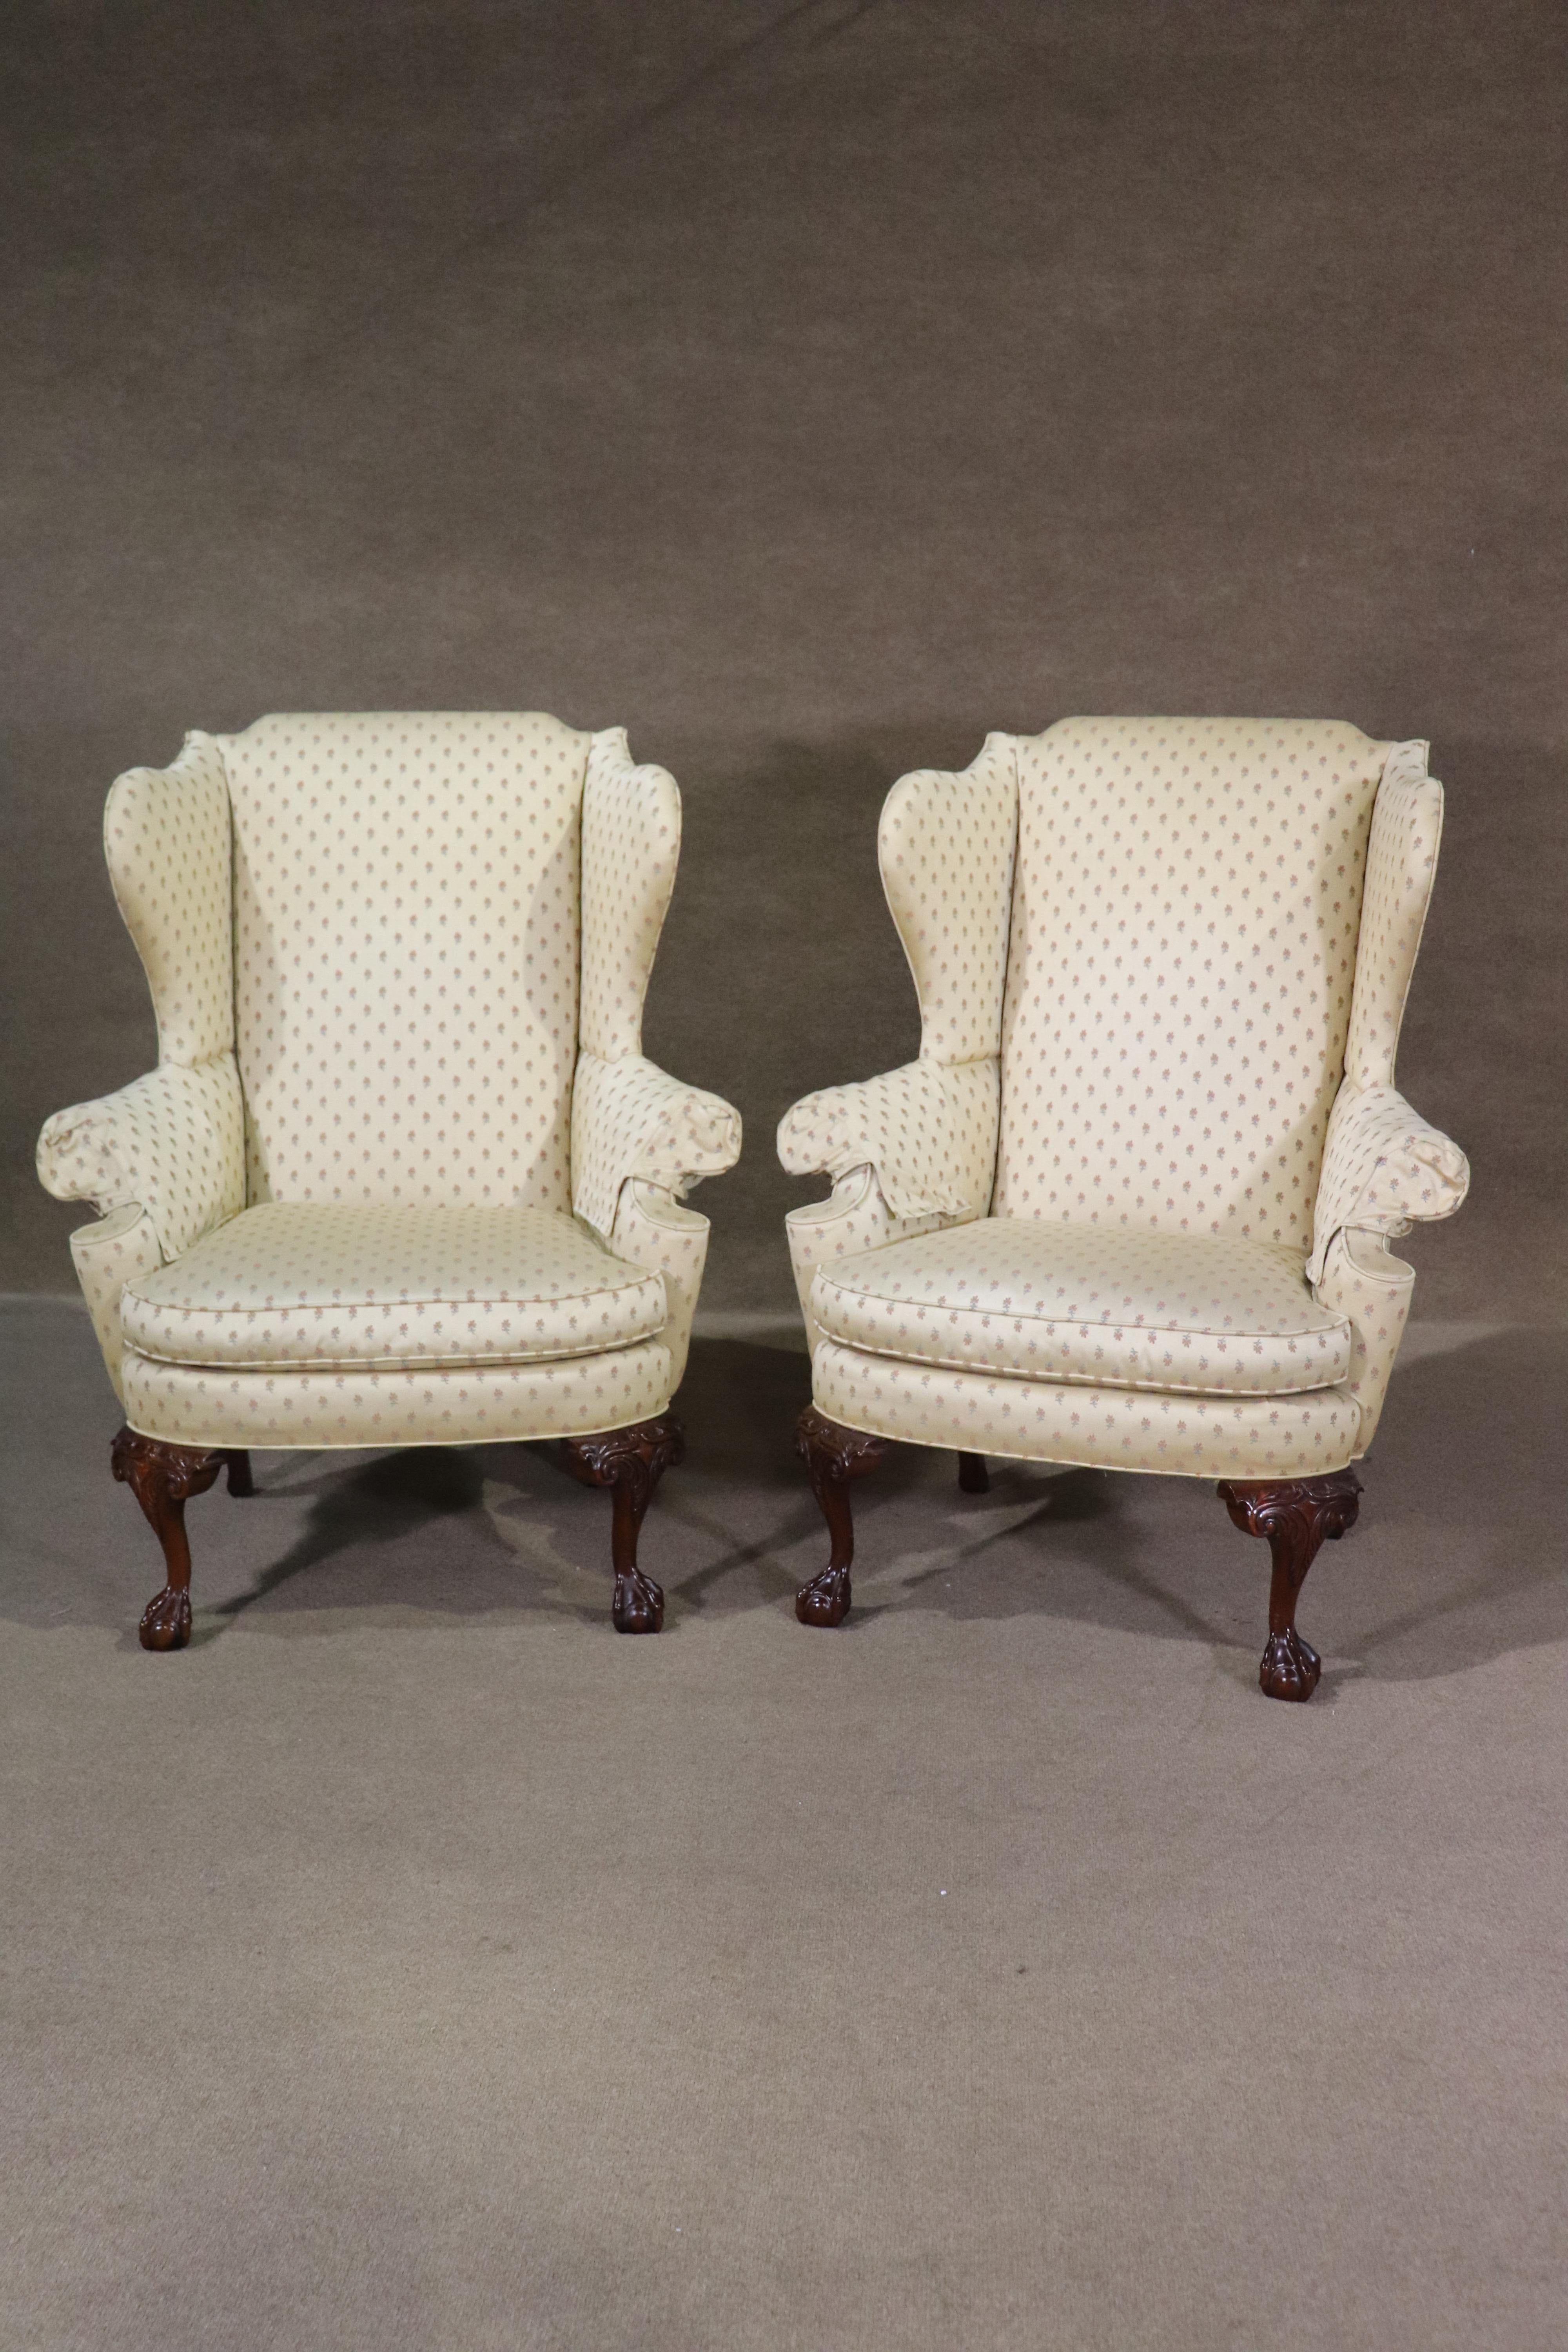 Vintage wingback armchairs with beautiful wood carved claw foot legs.
Please confirm location NY or NJ